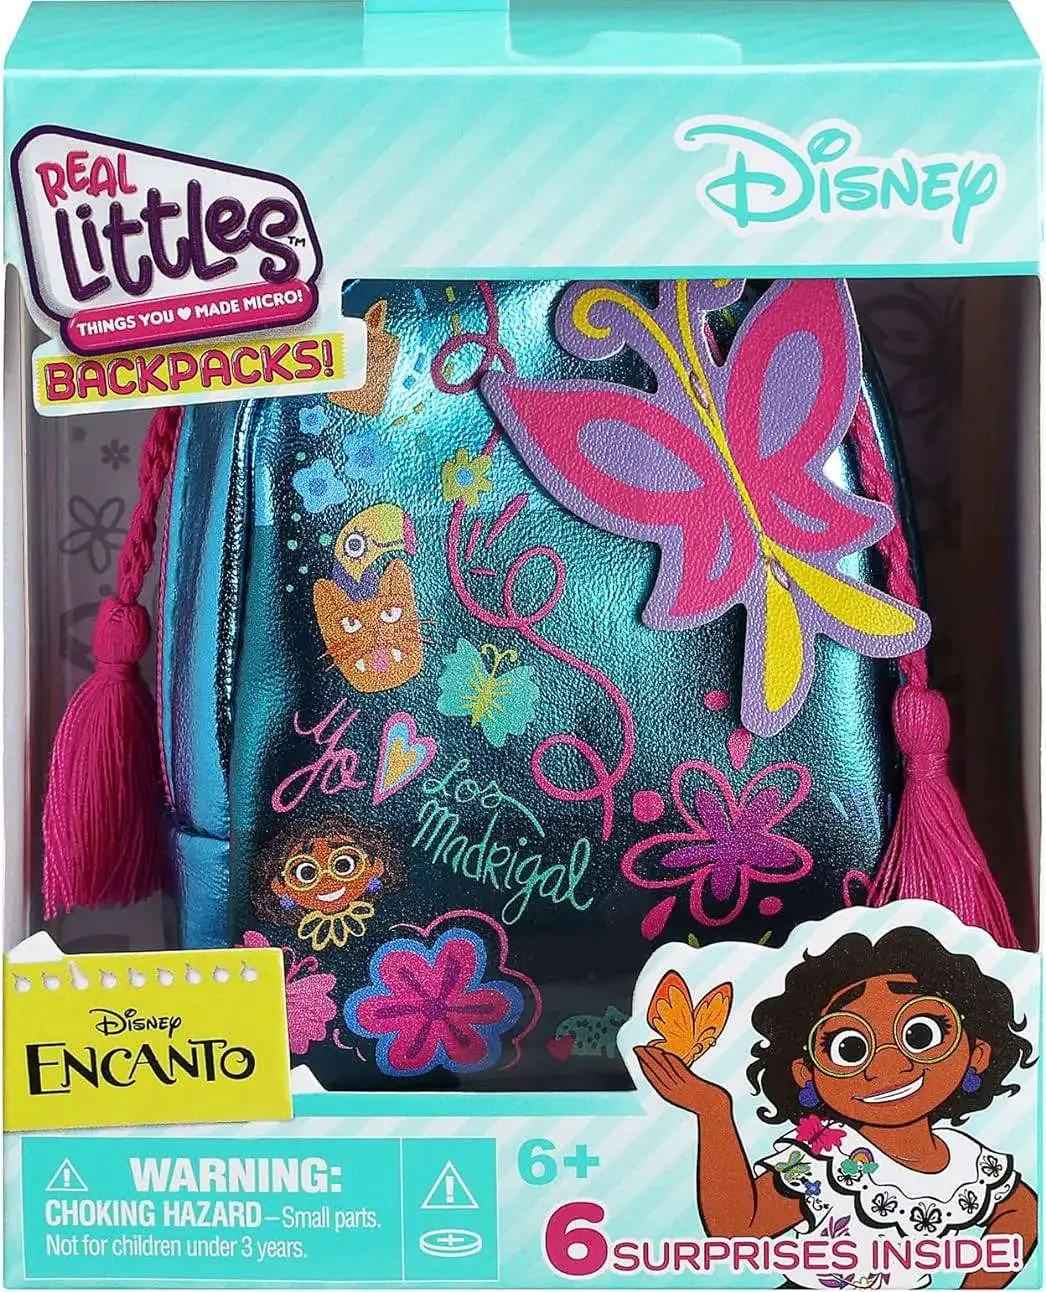 REAL LITTLES Disney Moana Collectible Micro Backpack with 7 Surprises Inside, Assorted